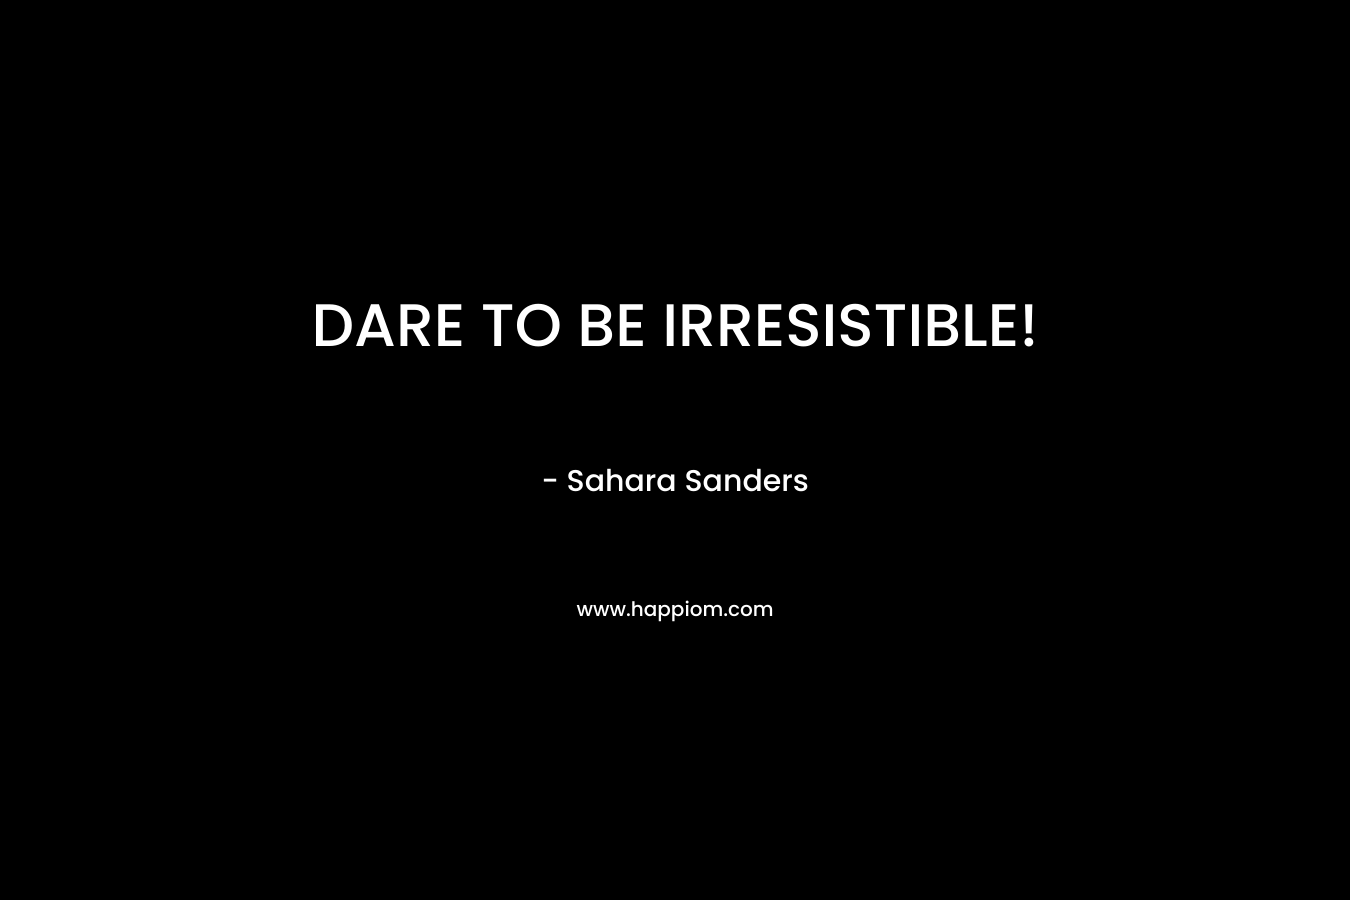 DARE TO BE IRRESISTIBLE!